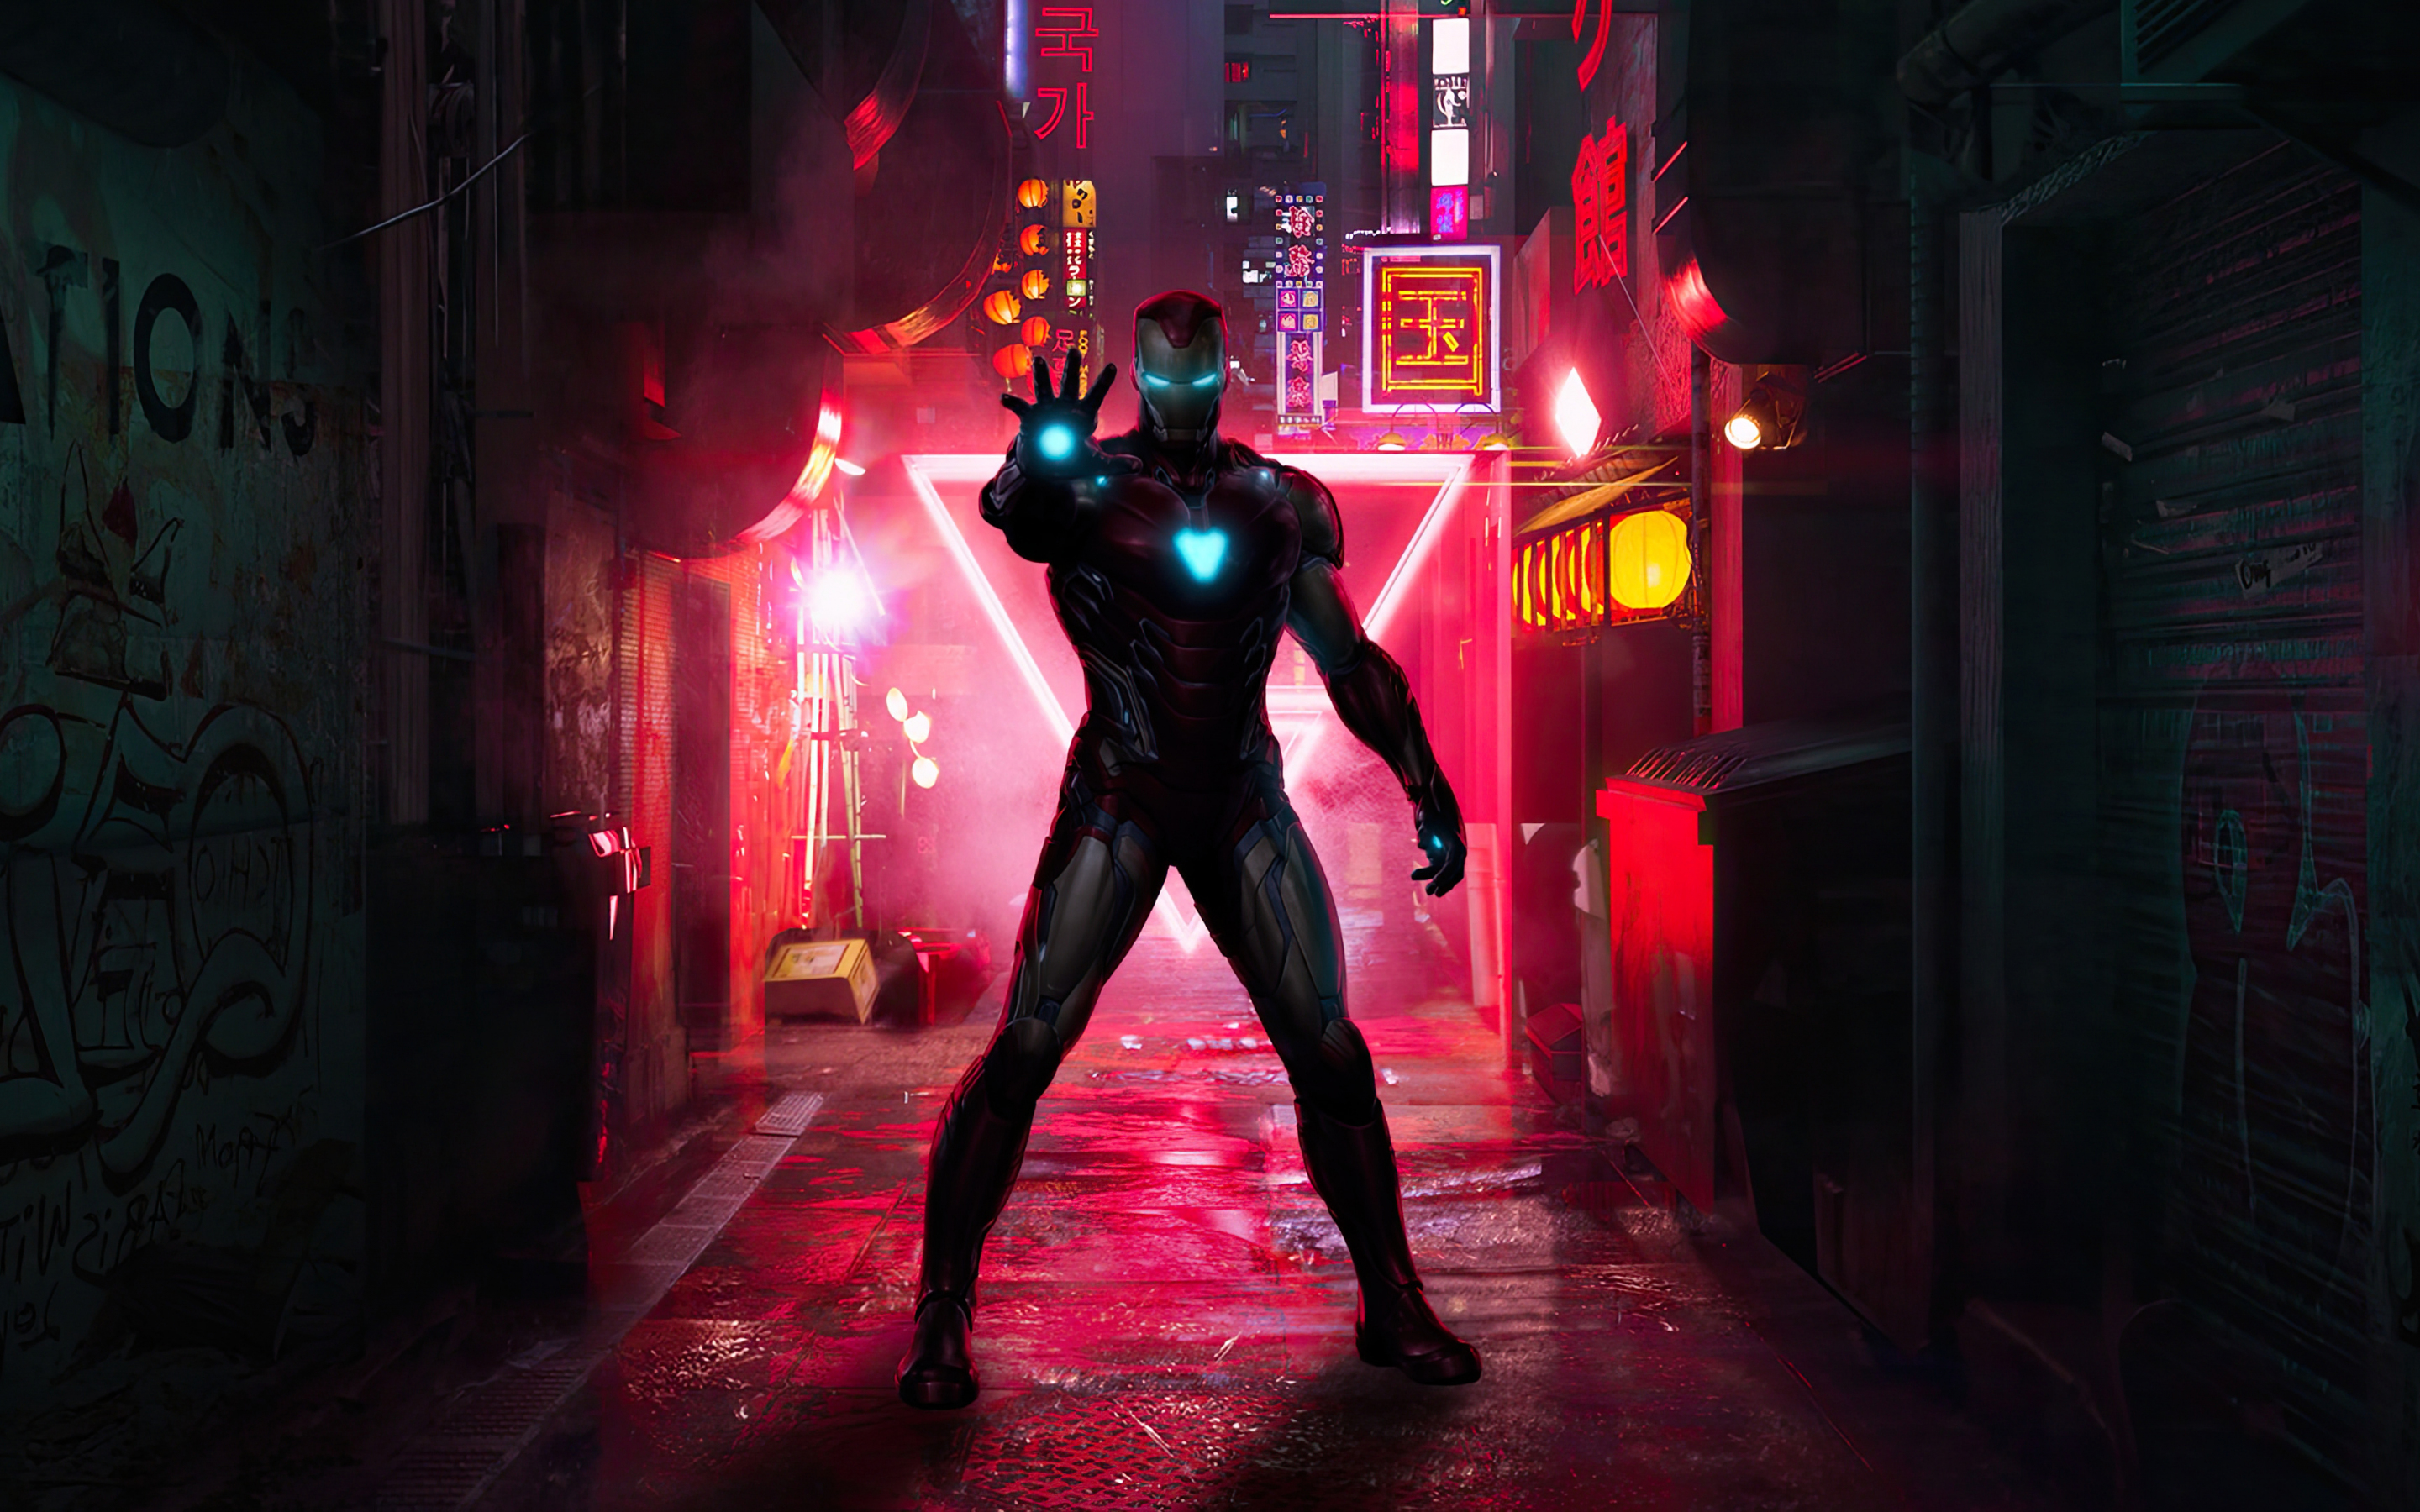 Iron man with latest suit, in street, 2880x1800 wallpaper